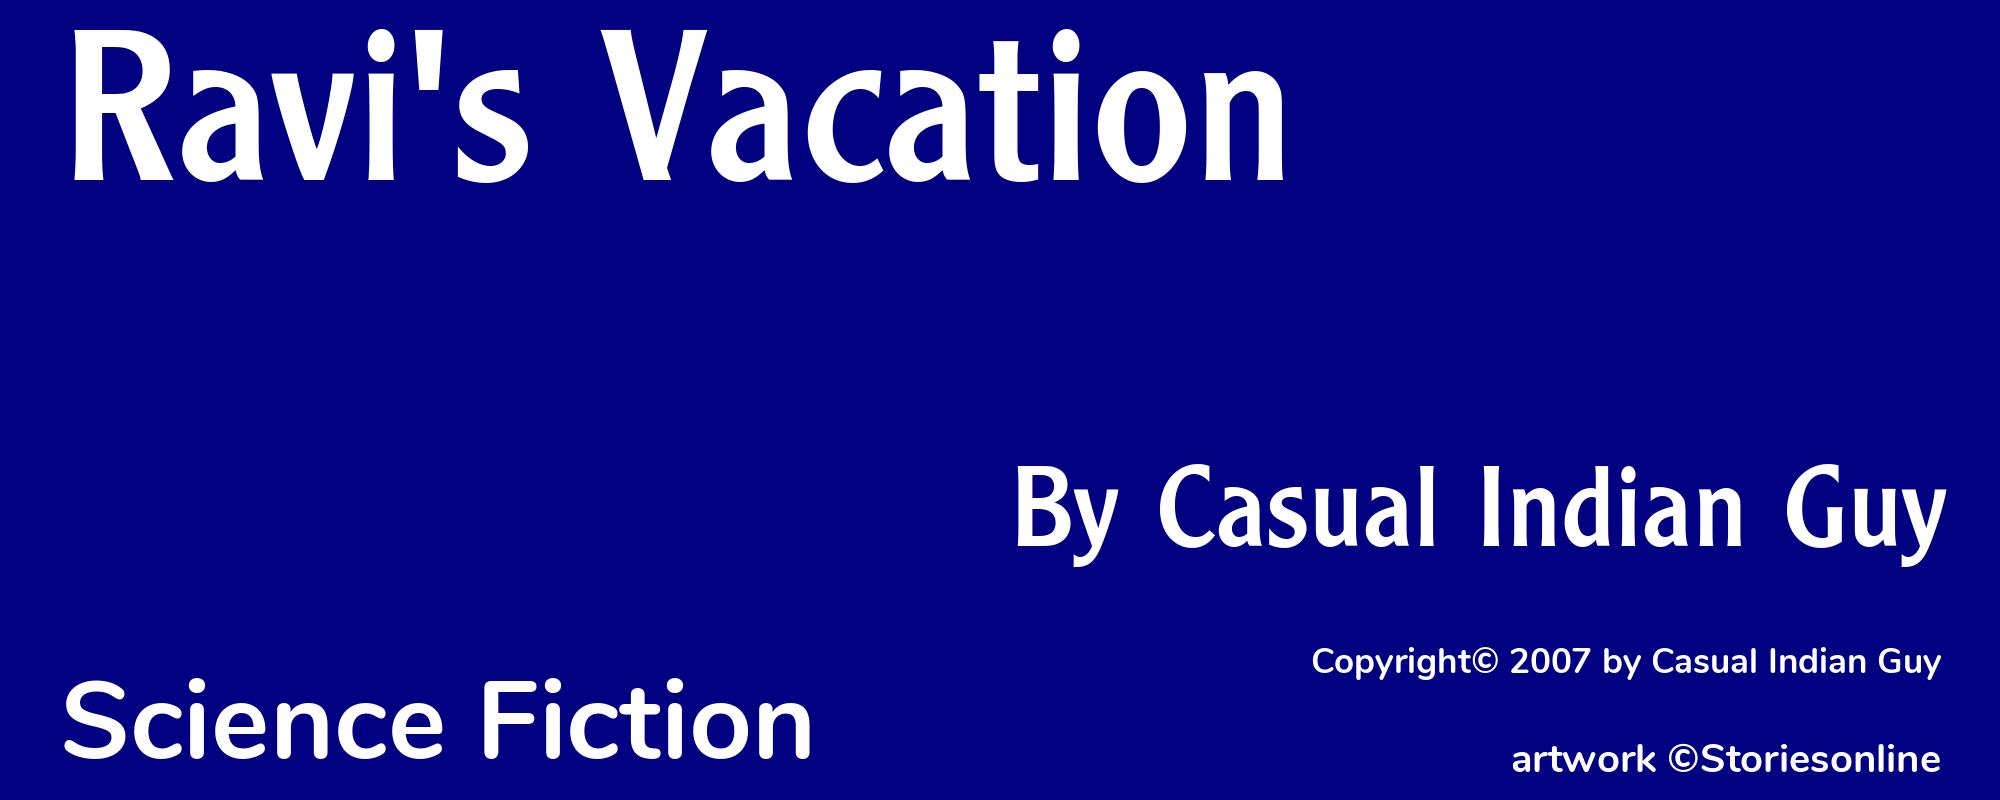 Ravi's Vacation - Cover